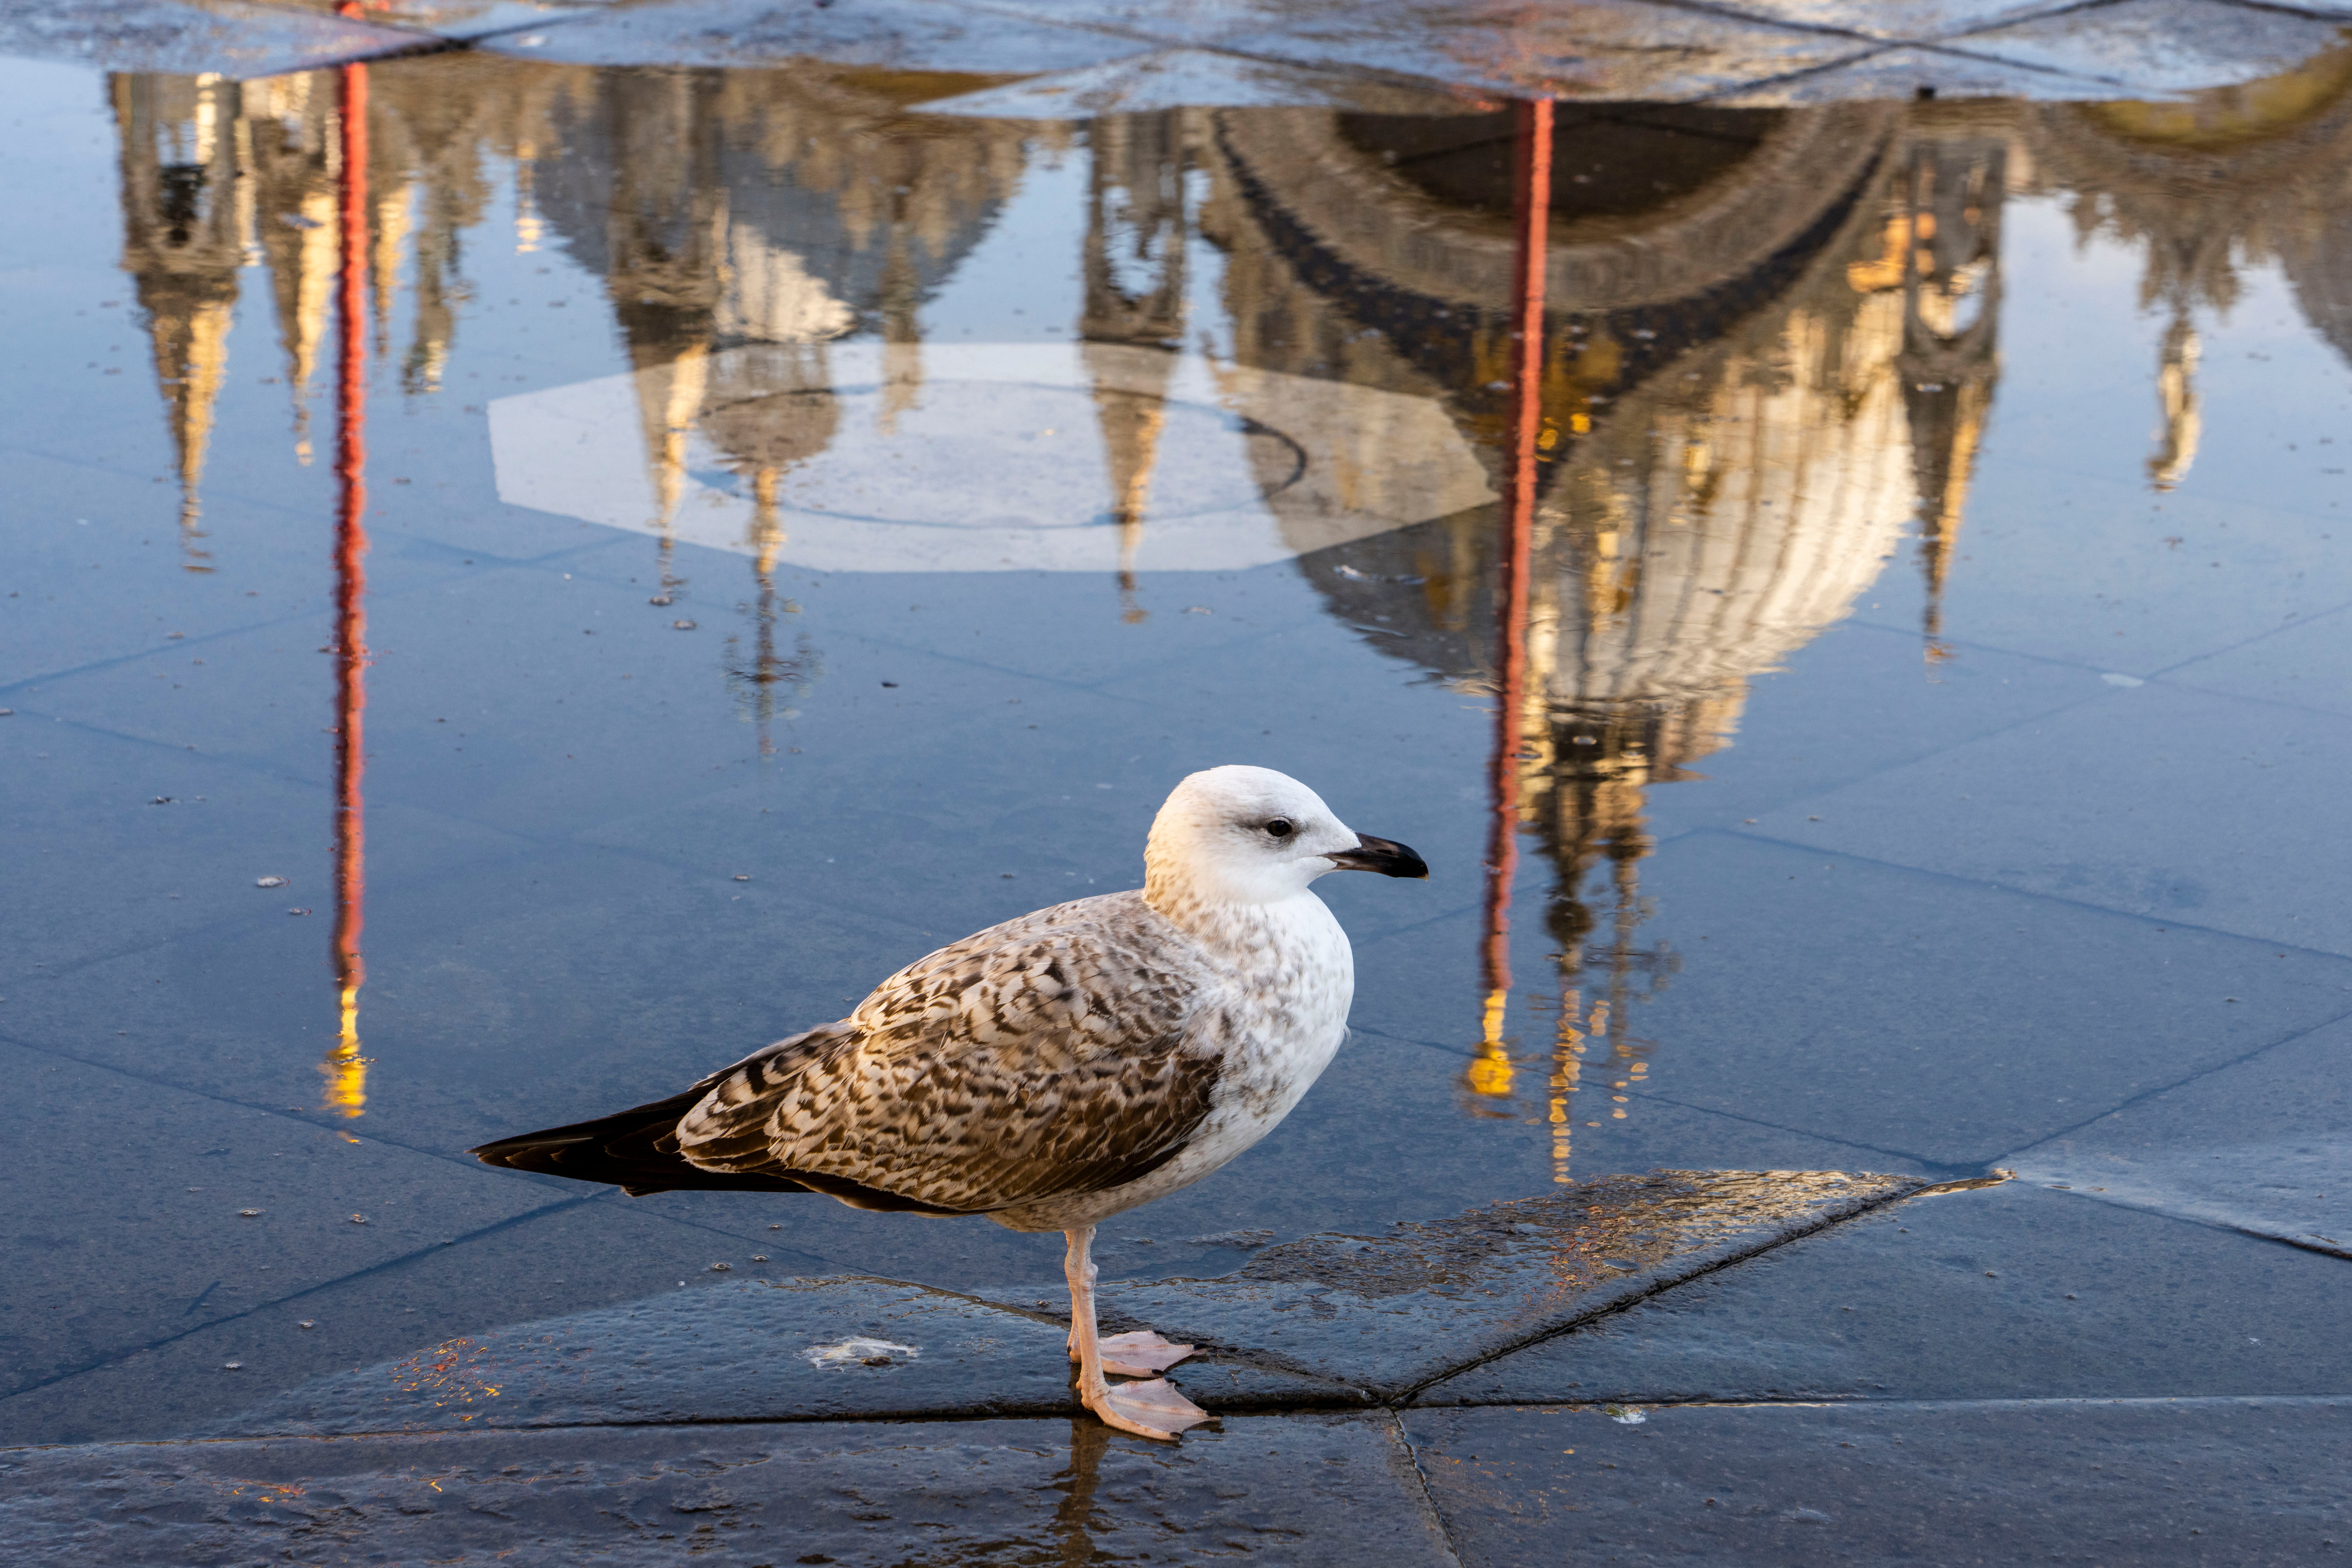 A seagull standing in St Mark’s Square